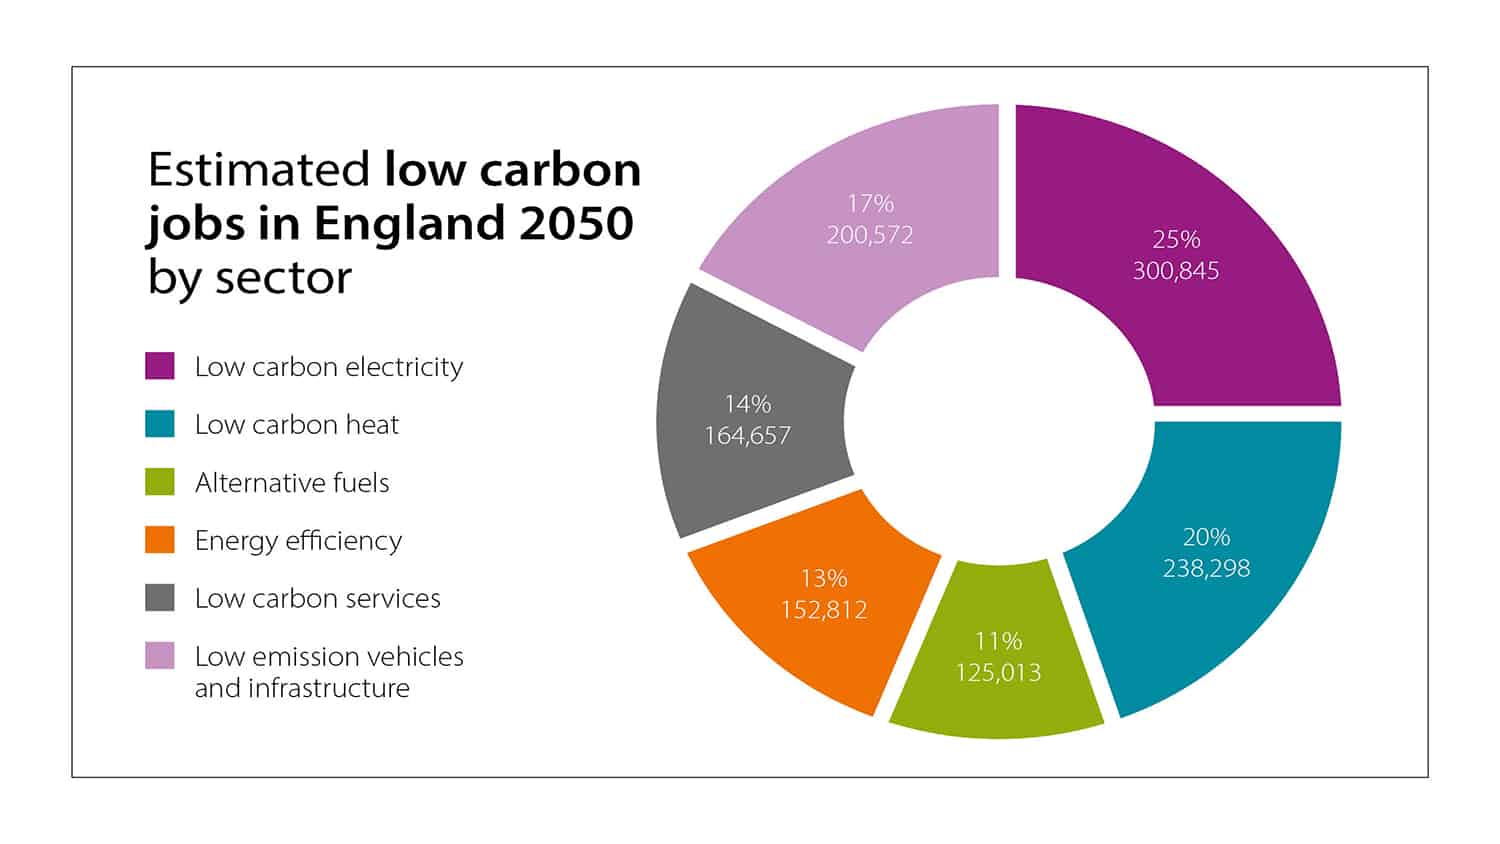 Graph showing estimated low carbon jobs in England by 2050